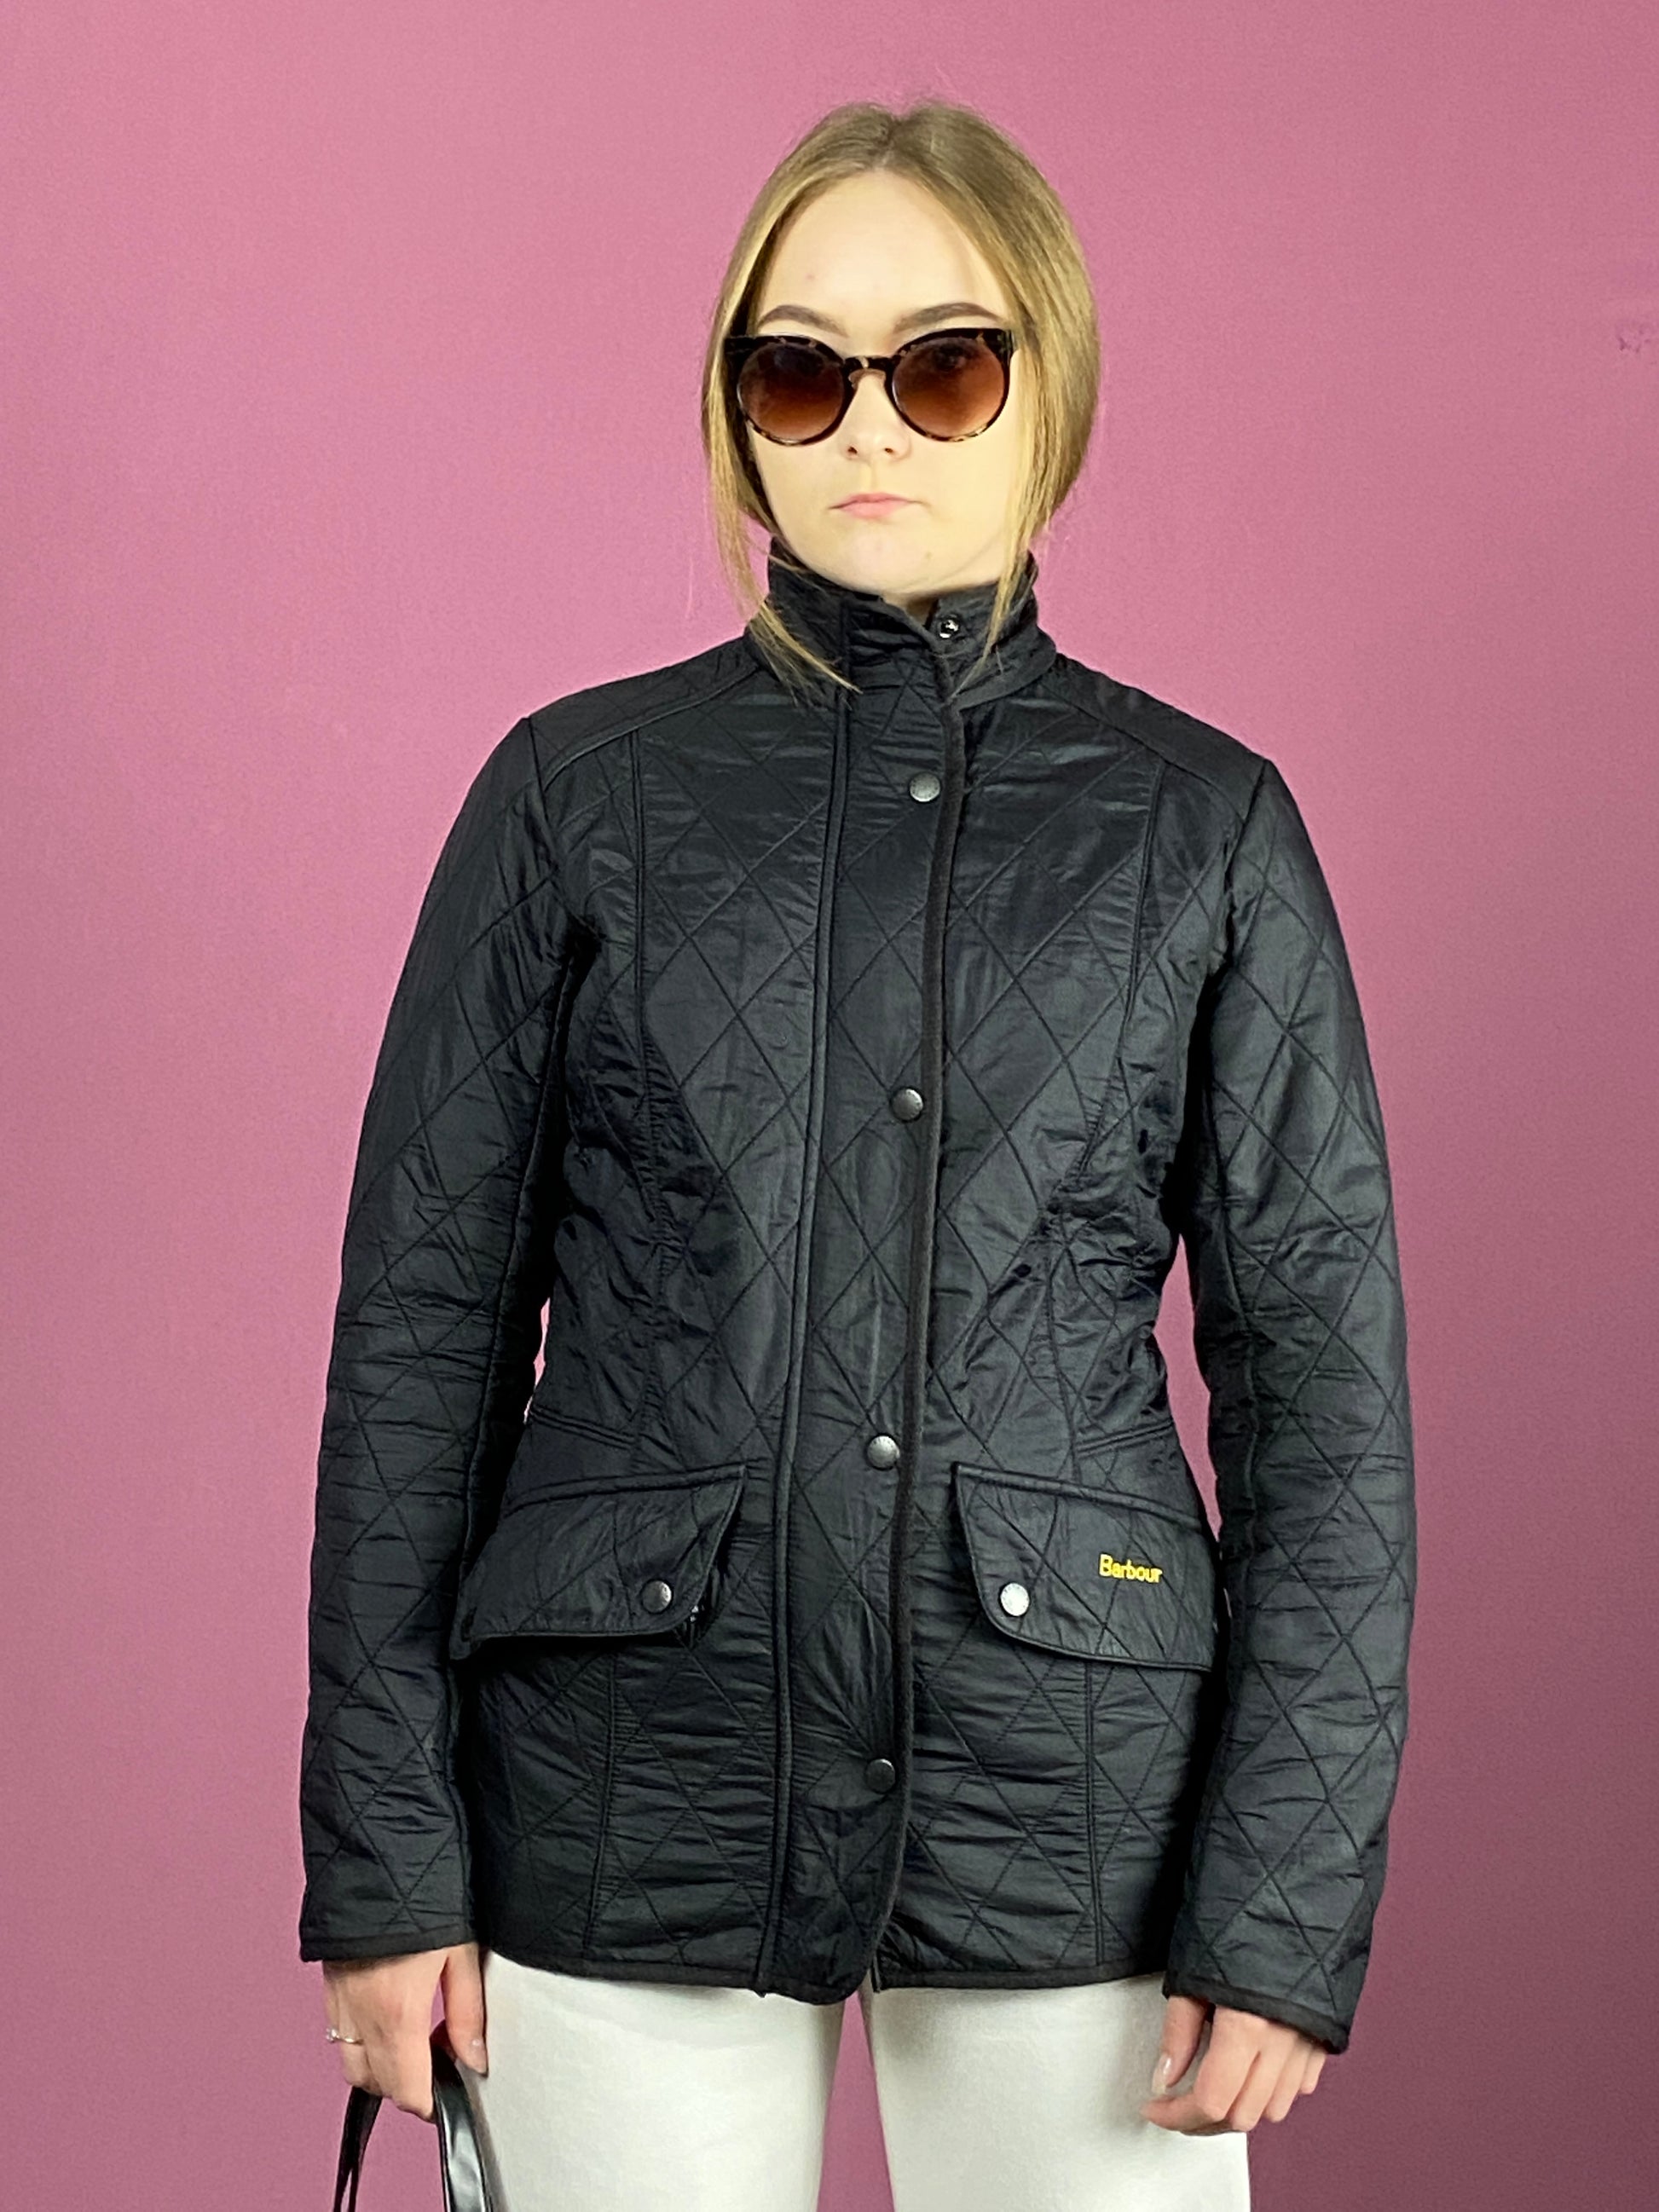 Barbour Vintage Women's Quilted Jacket - Small Black Nylon